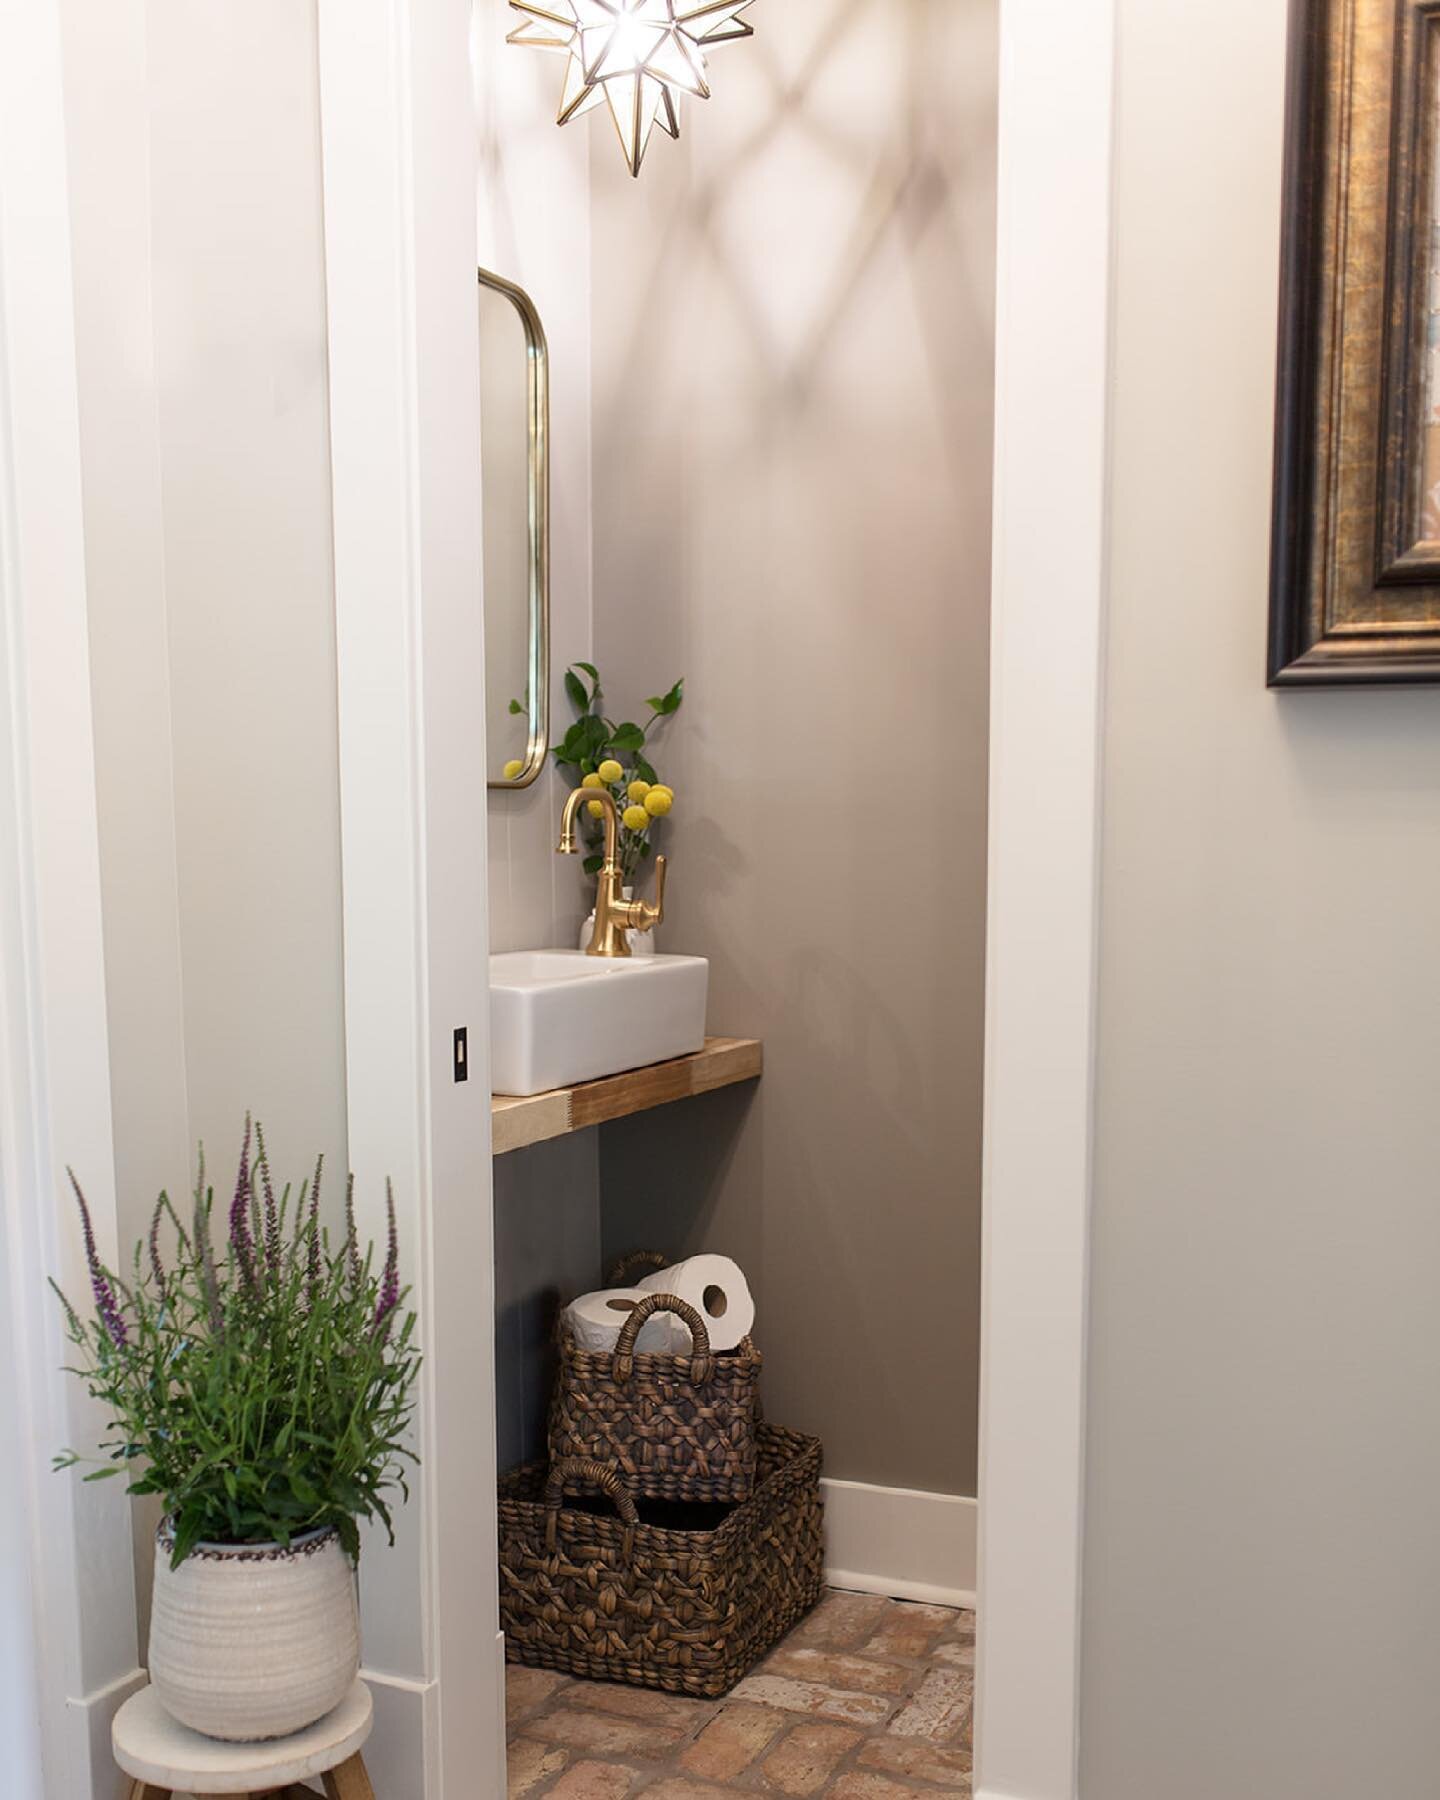 When there is no access to a bathroom unless you go through a bedroom you create the worlds smallest powder bathroom 😝. builder @pritchettsmithbuilders photo by @kmosleyphotography #powderroom #historicdowntownfranklin #nashvilleinteriors